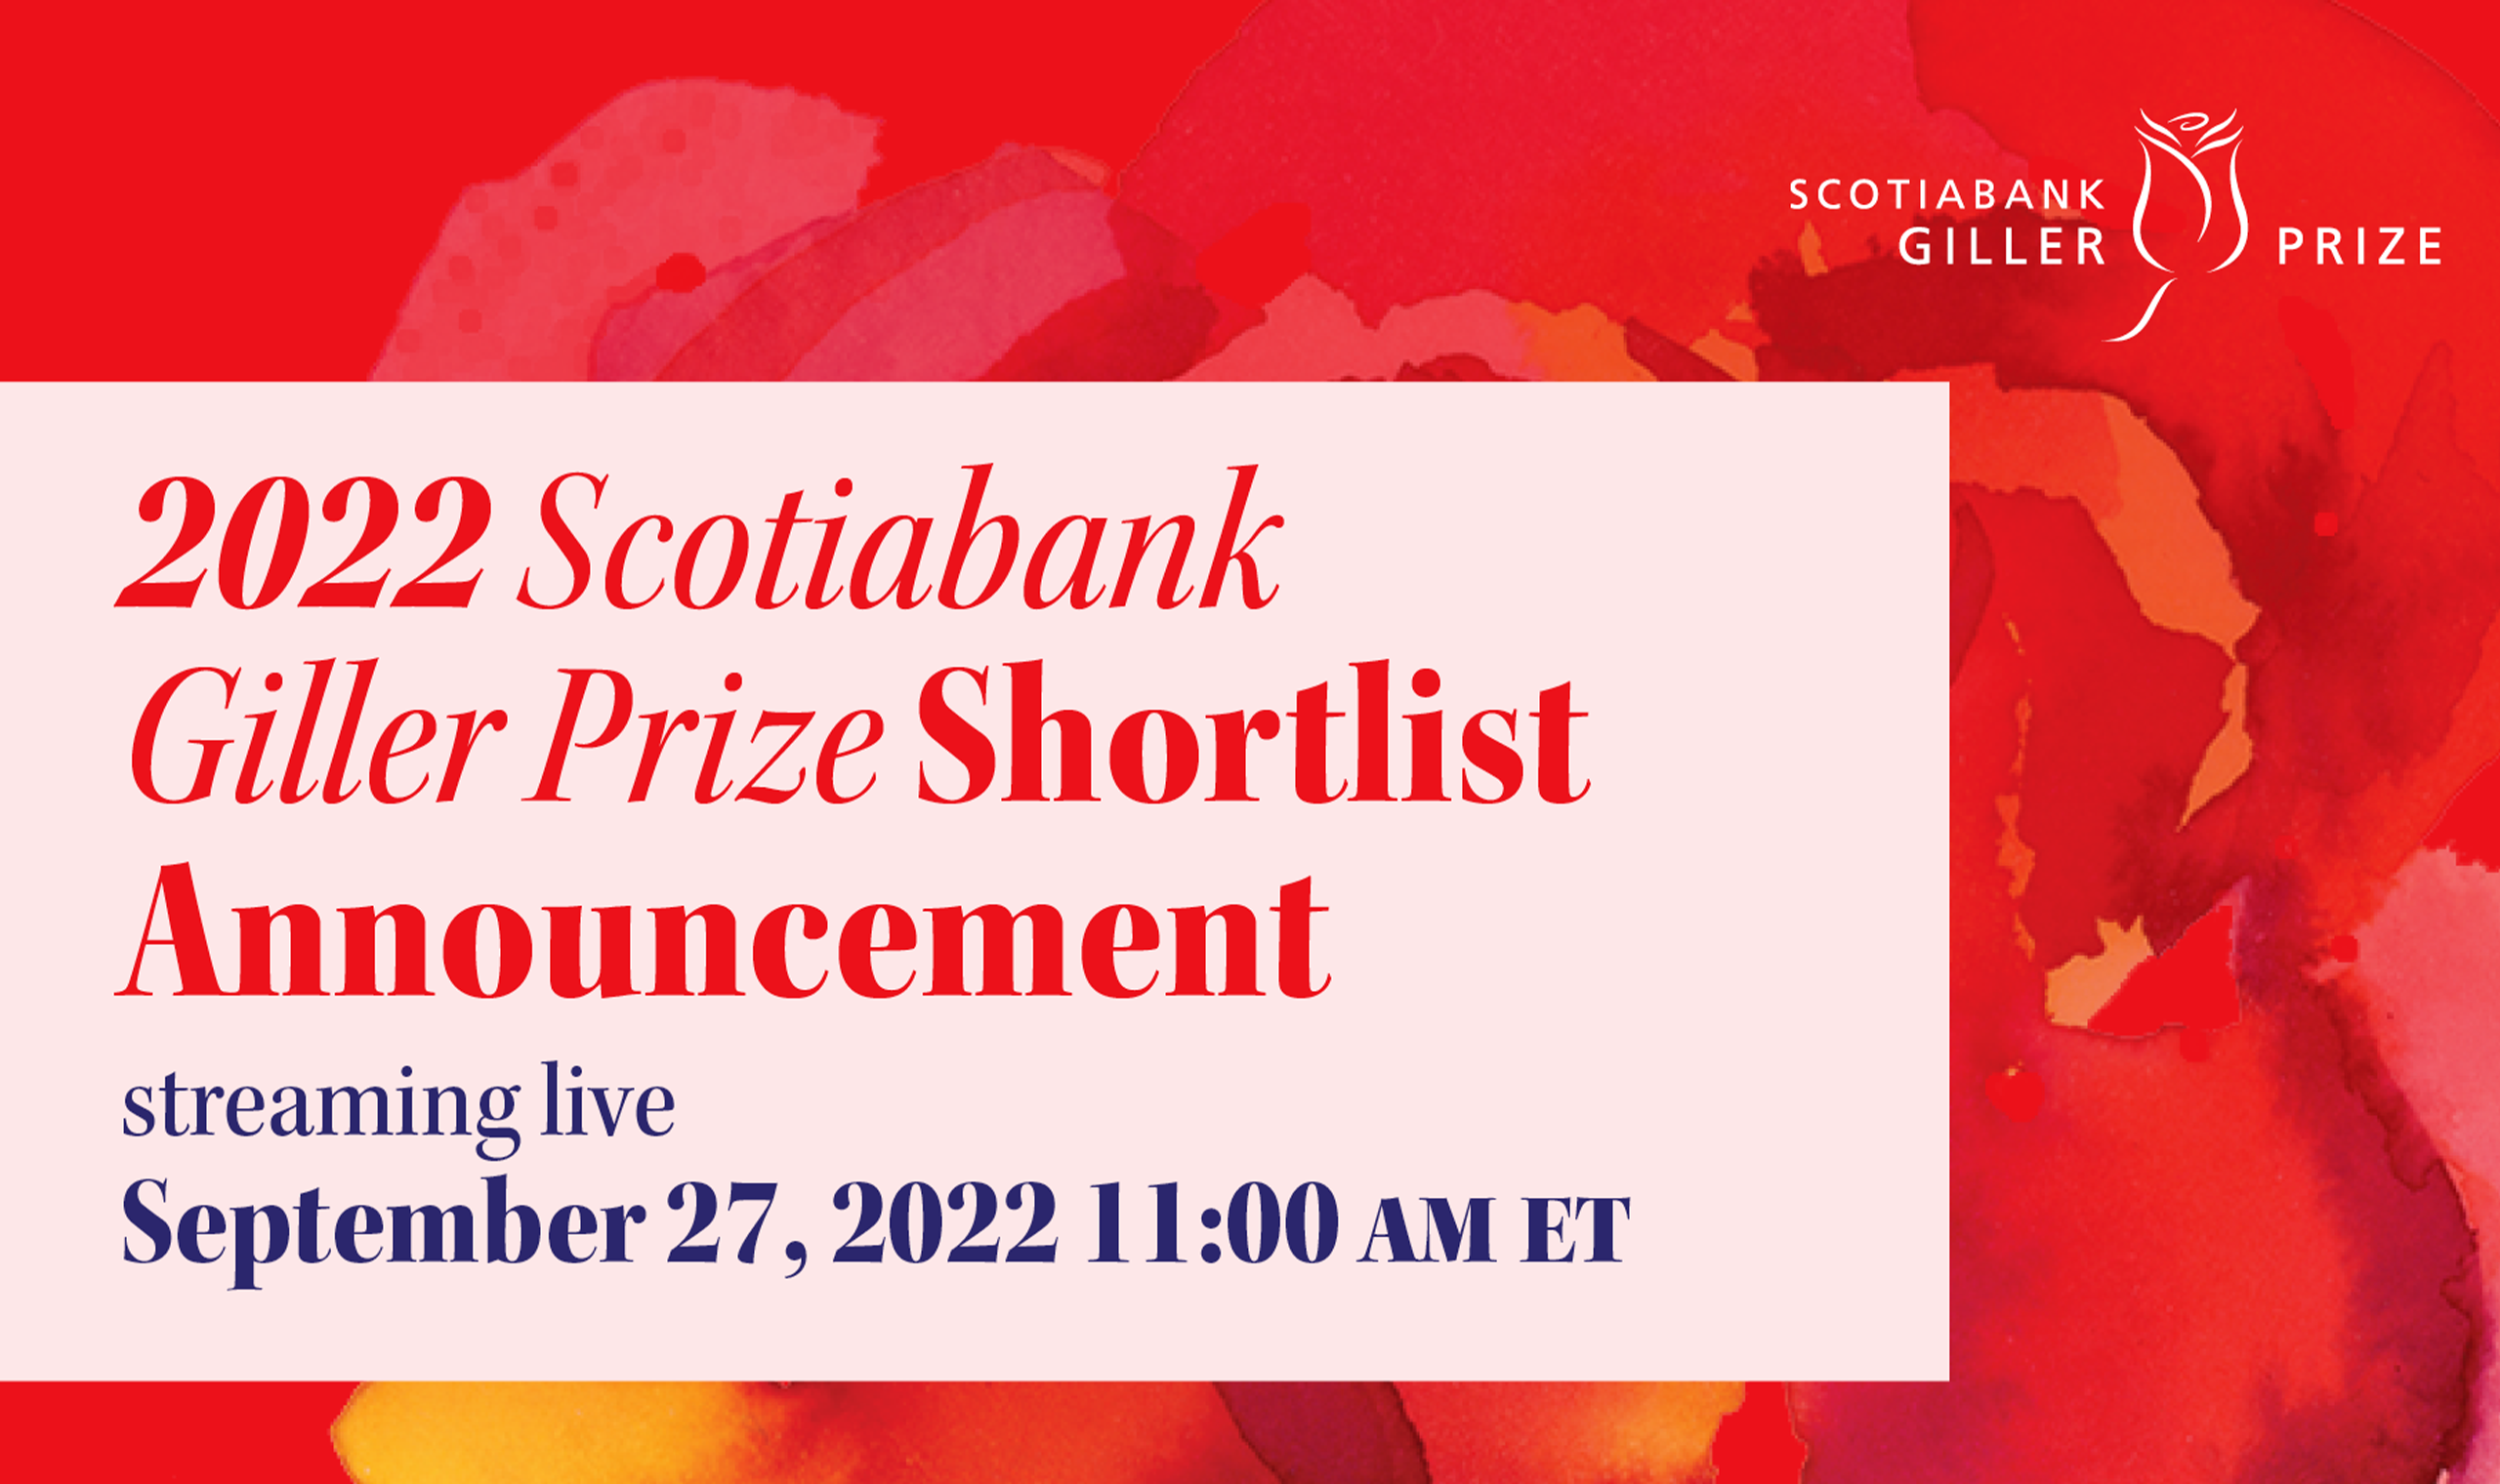 How to Watch the 2022 Scotiabank Giller Prize Shortlist Announcement